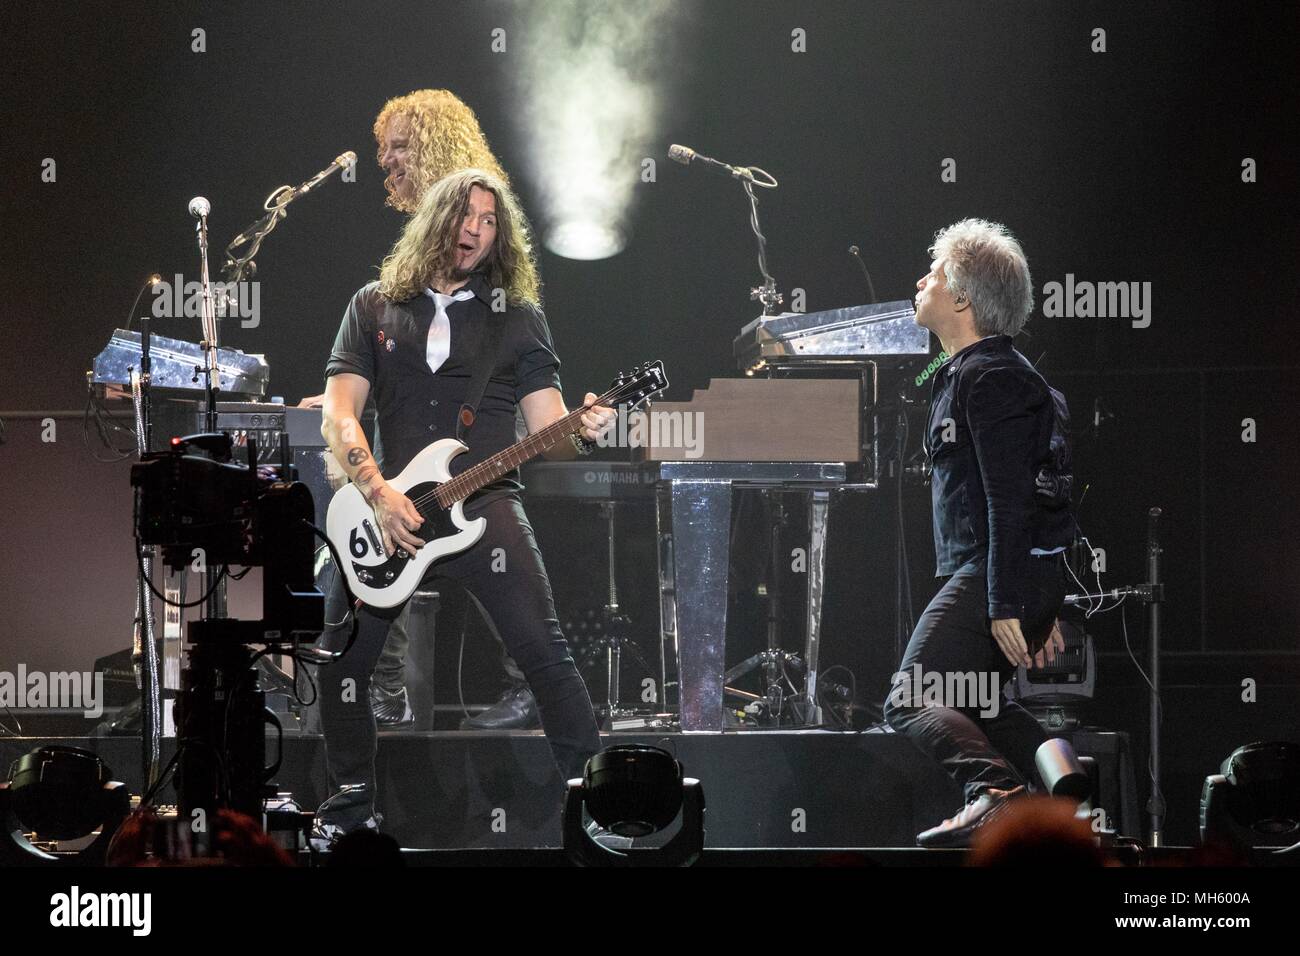 Milwaukee, Wisconsin, USA. 29th Apr, 2018. DAVID BRYAN, PHIL X (PHIL XENIDIS) and JON BON JOVI of Bon Jovi during the This House Is Not For Sale tour at the Bradley Center in Milwaukee, Wisconsin Credit: Daniel DeSlover/ZUMA Wire/Alamy Live News Stock Photo